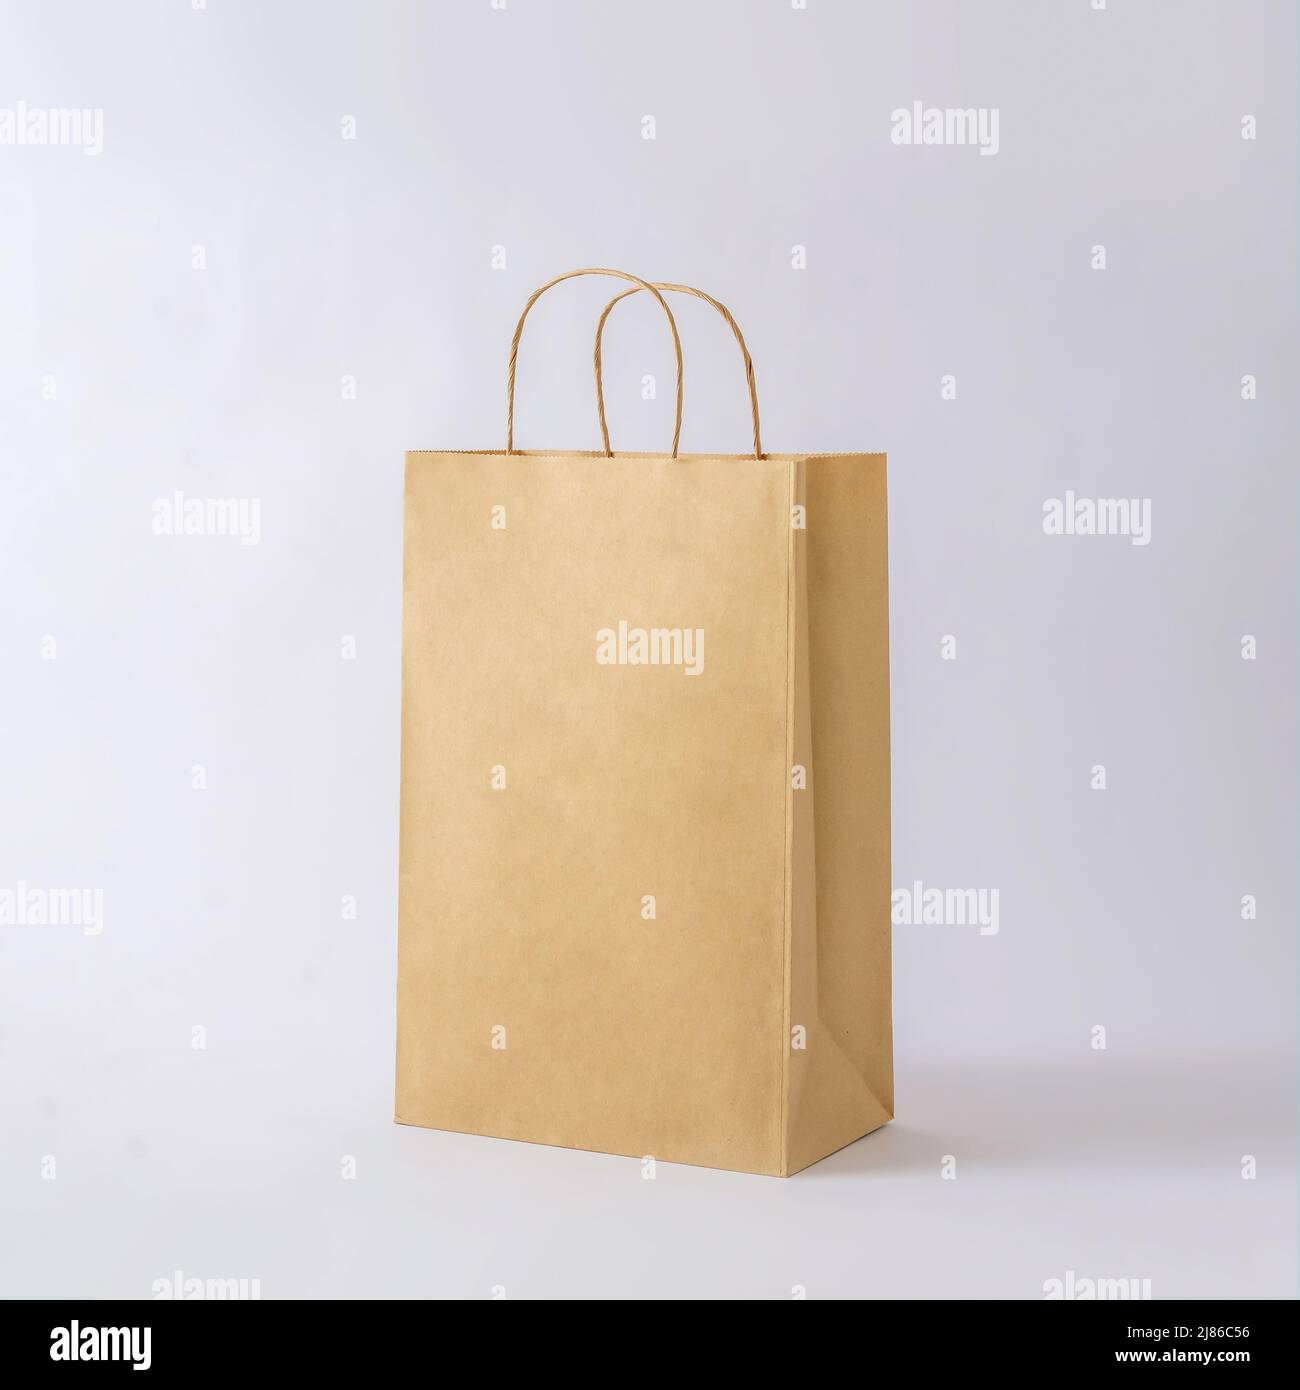 Cardboard brown paper bag for shop shopping and business mockup. Concept of minimal purchase sale and delivery. Stock Photo